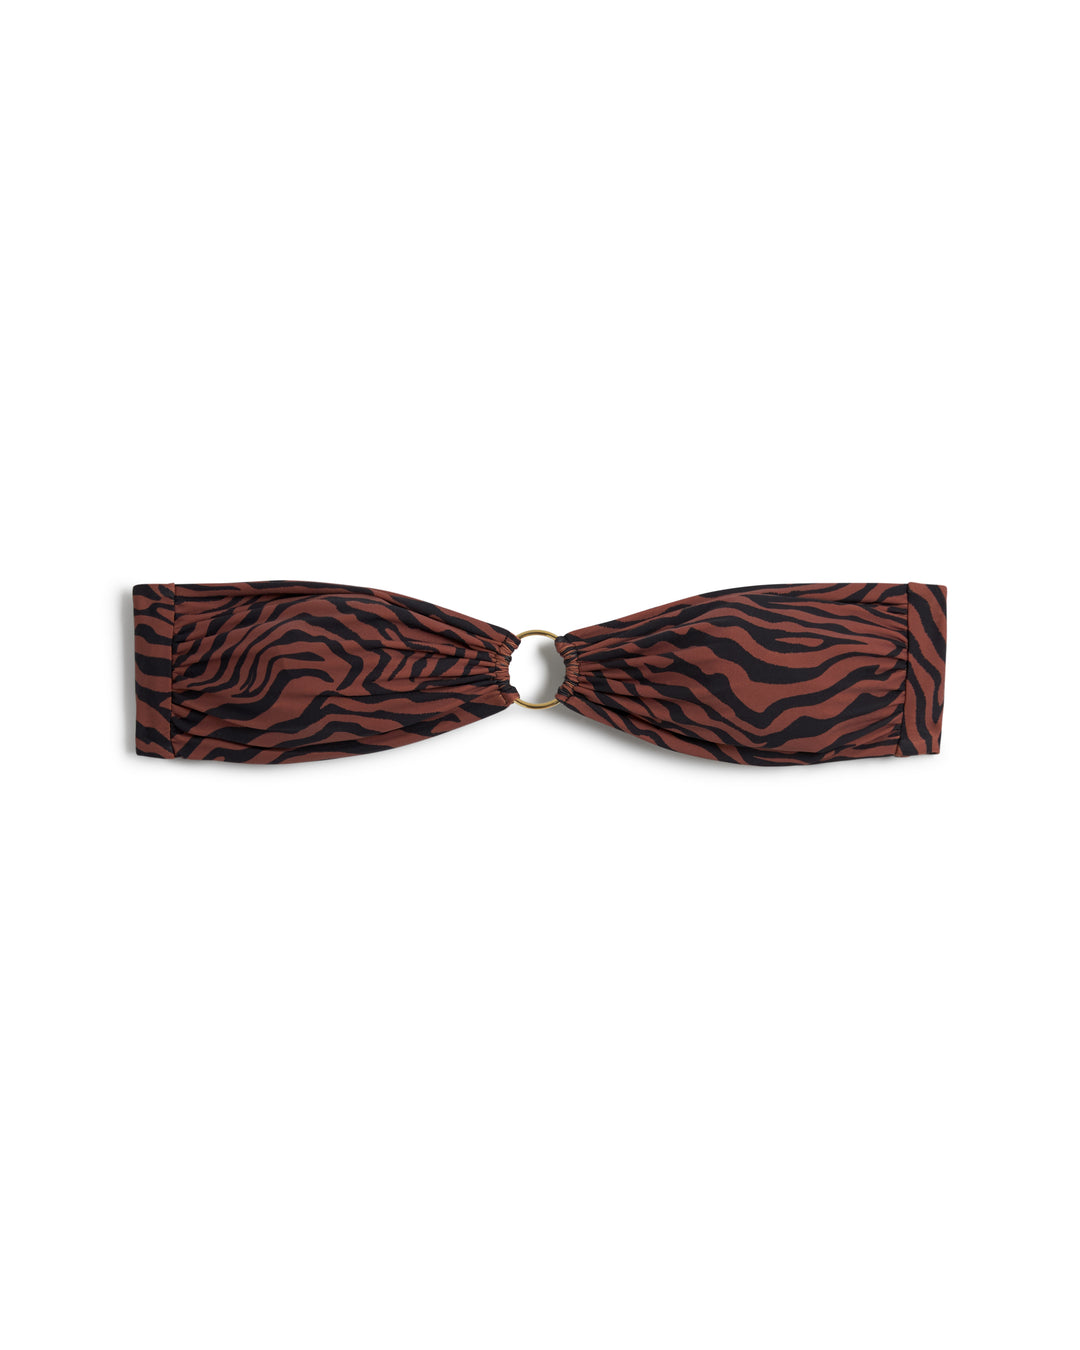 Introducing **The Gomera Top - Onyx** by **Dandy Del Mar**, a strapless bikini adorned with a striking brown and black animal print pattern, crafted from recycled nylon, and featuring an elegant ring detail at the center.